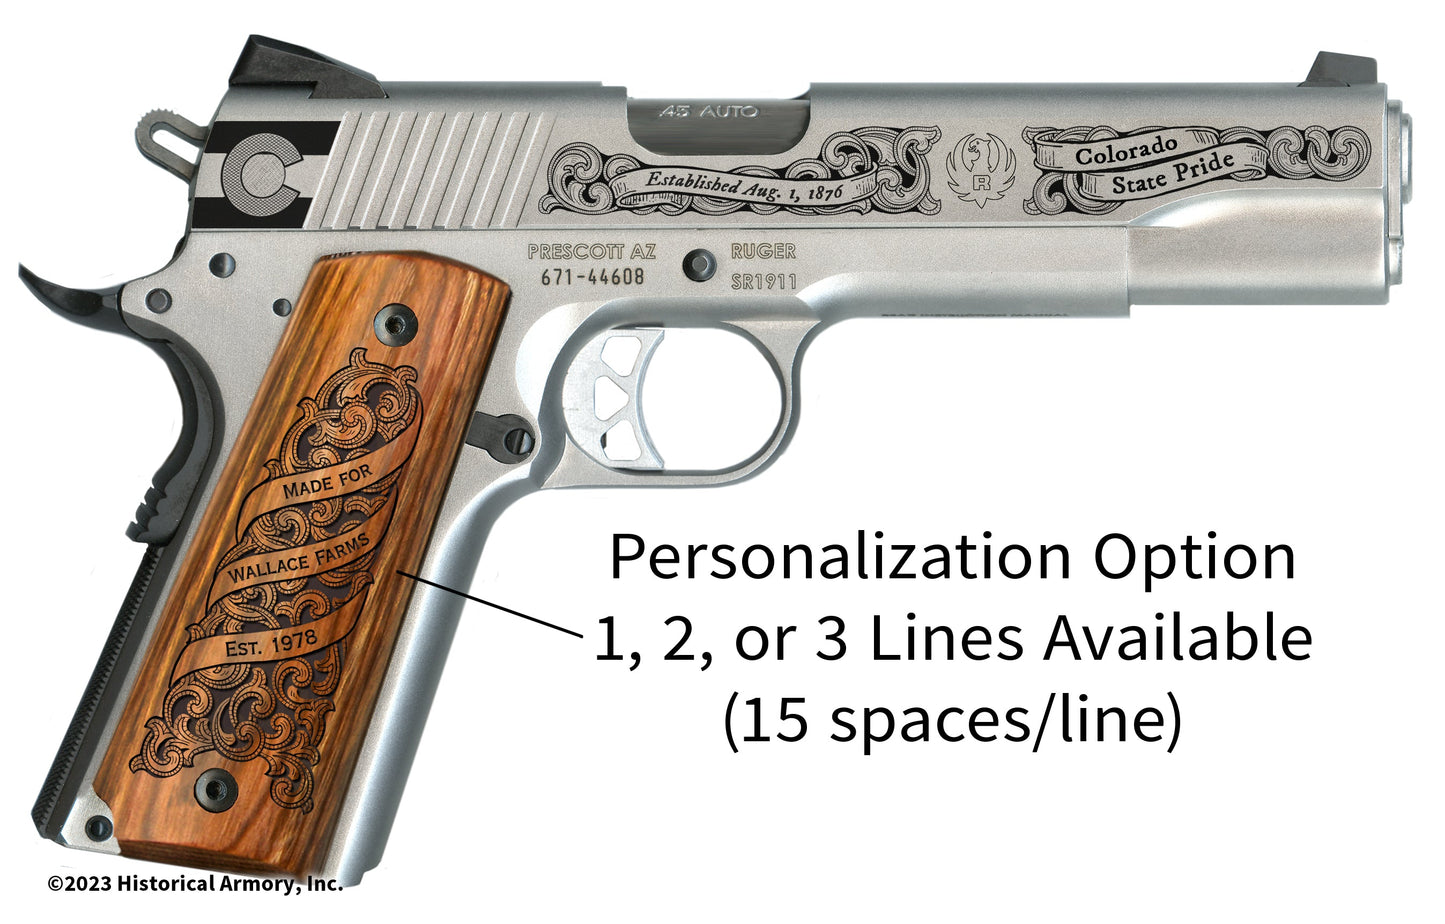 Colorado State Pride Limited Edition Engraved 1911 Personalized Right Side Grip